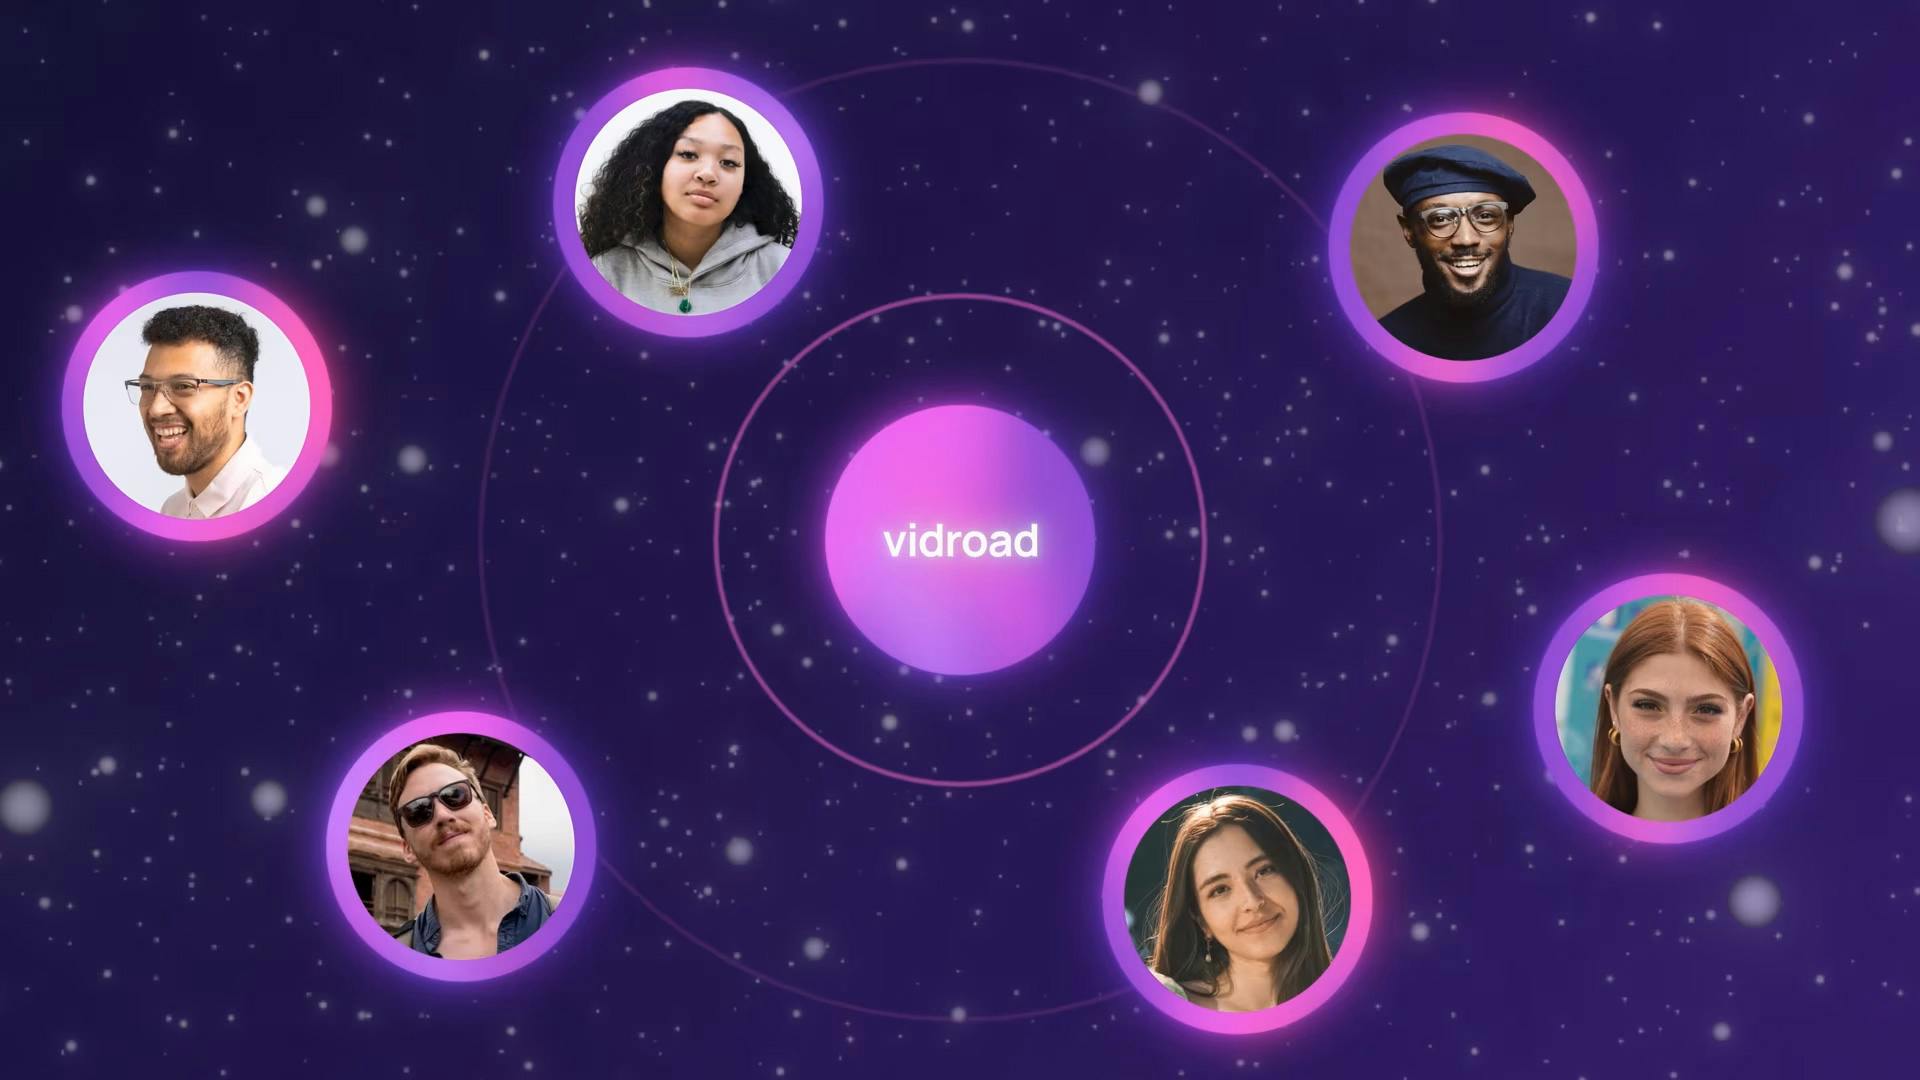 Vidroad logo floating in space with profile images floating around it